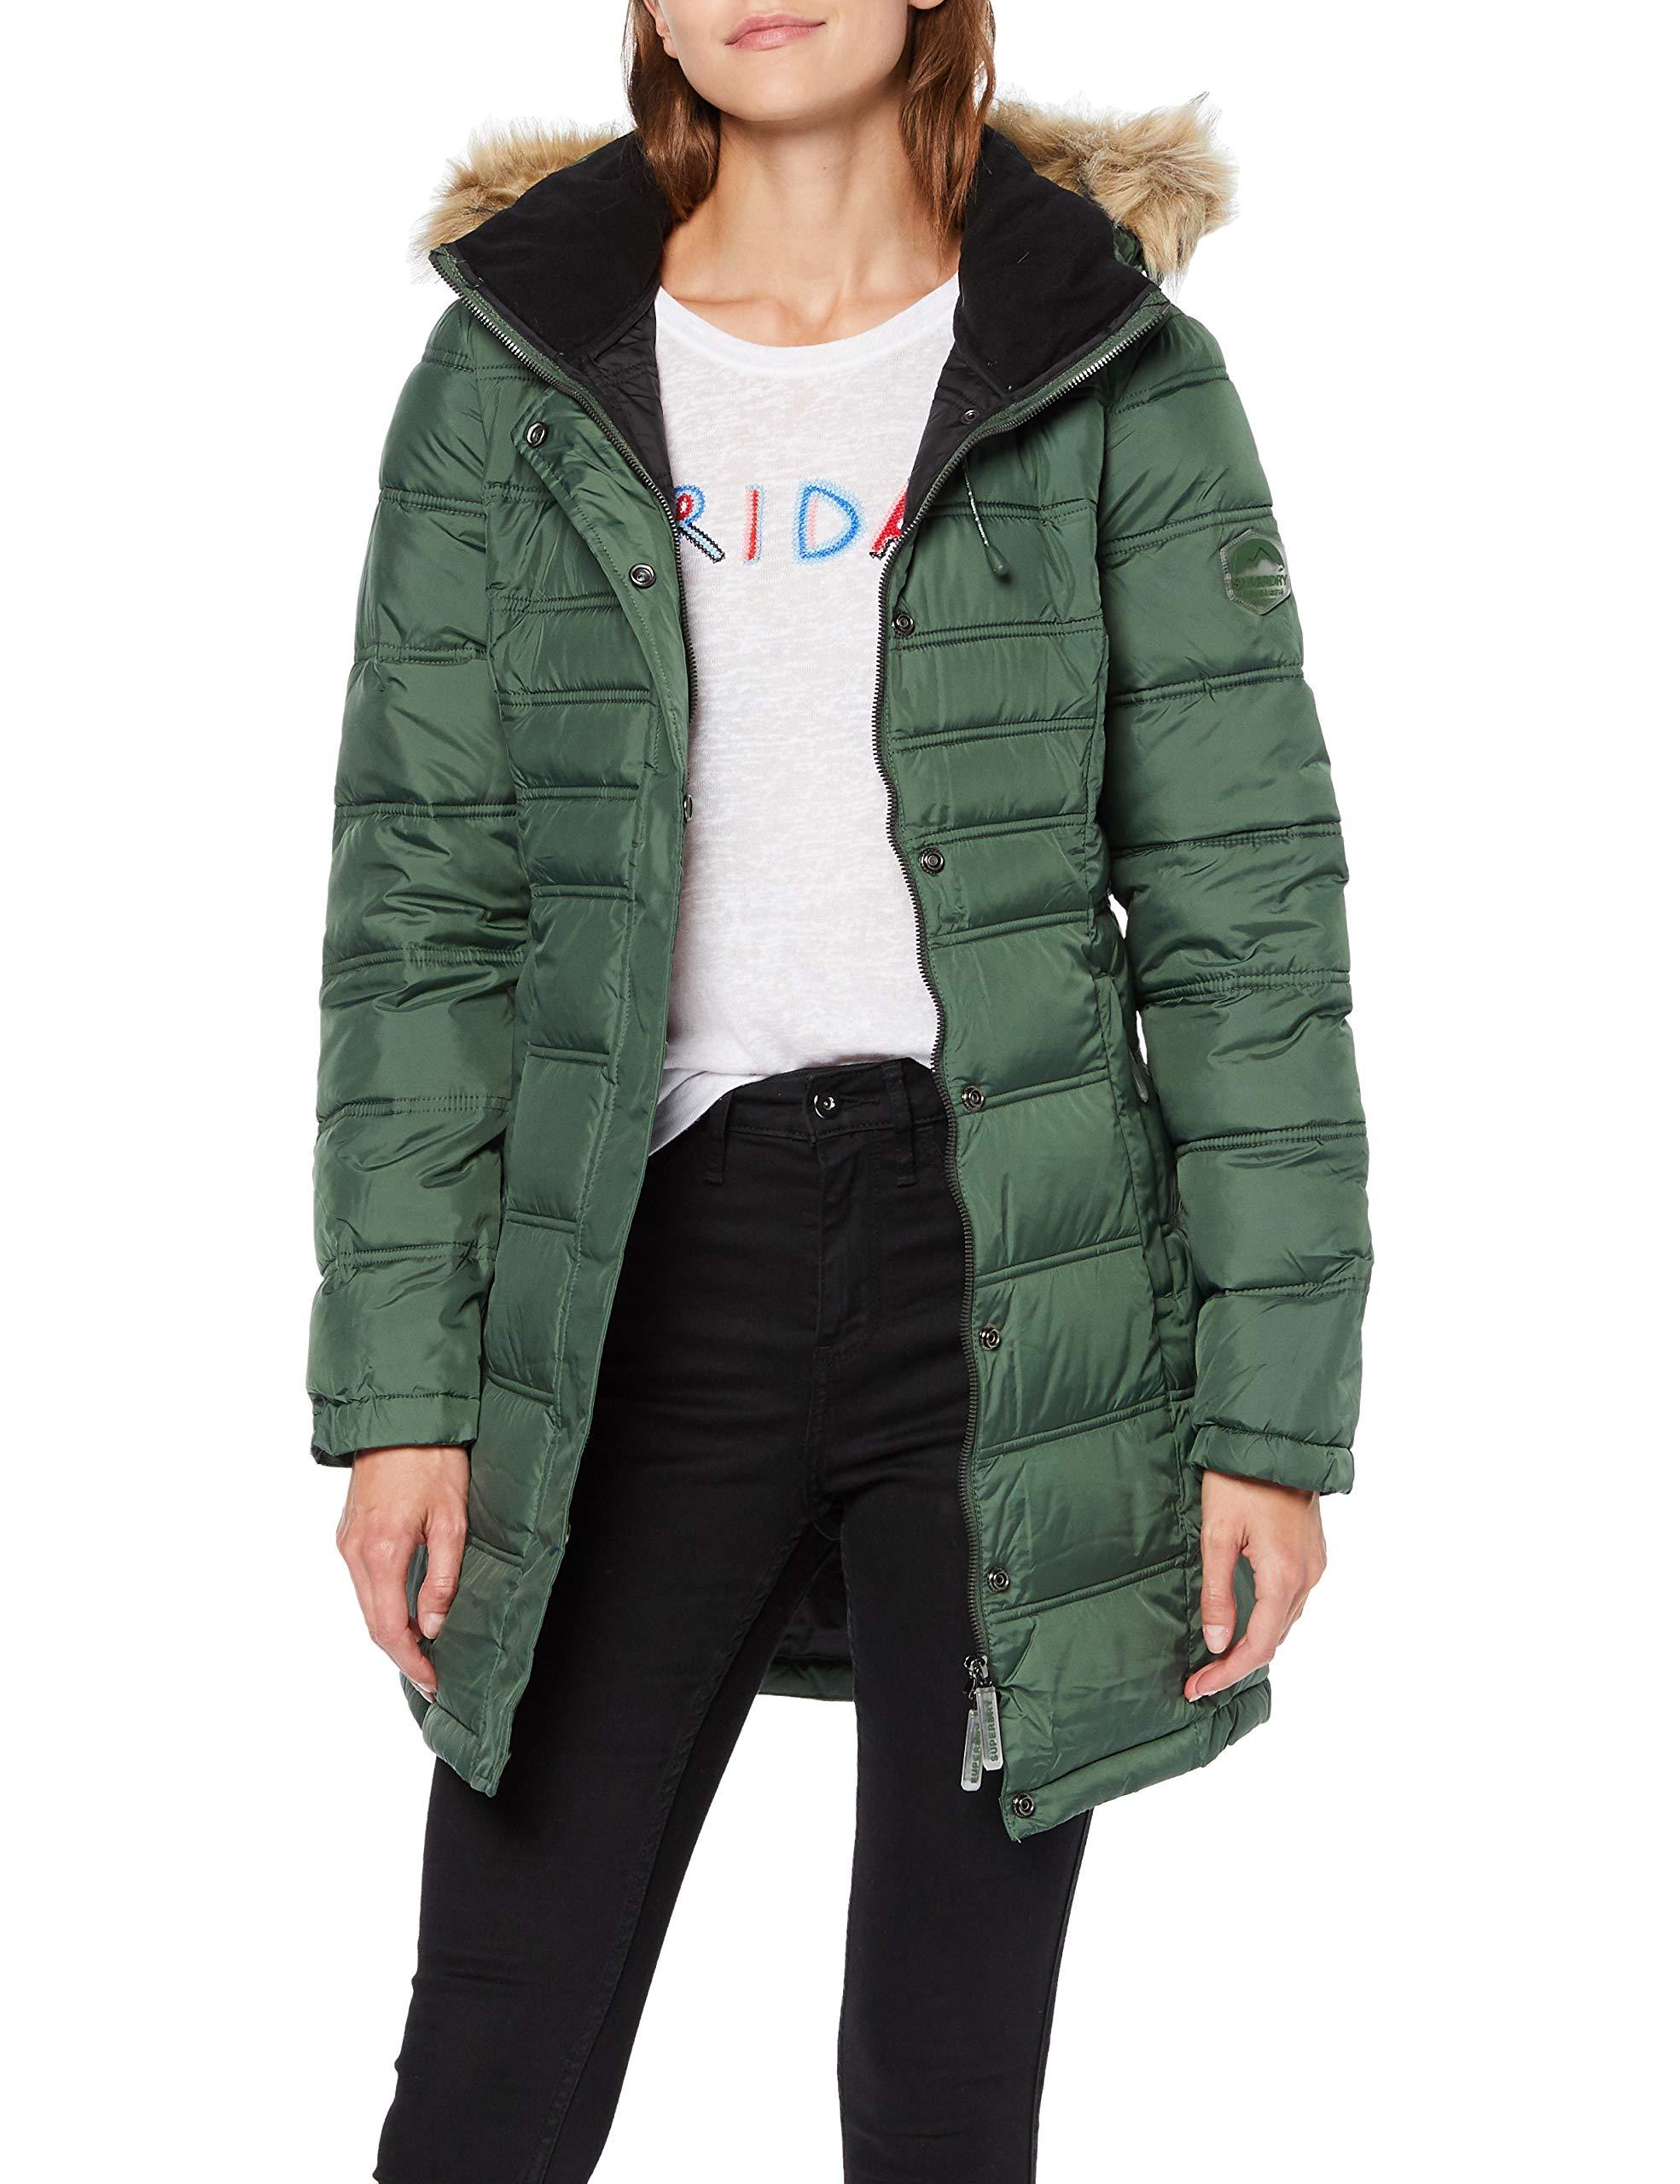 Superdry Fur Mountain Super Fuji Jacket in Green (Ice Green e) (Green) -  Save 36% - Lyst